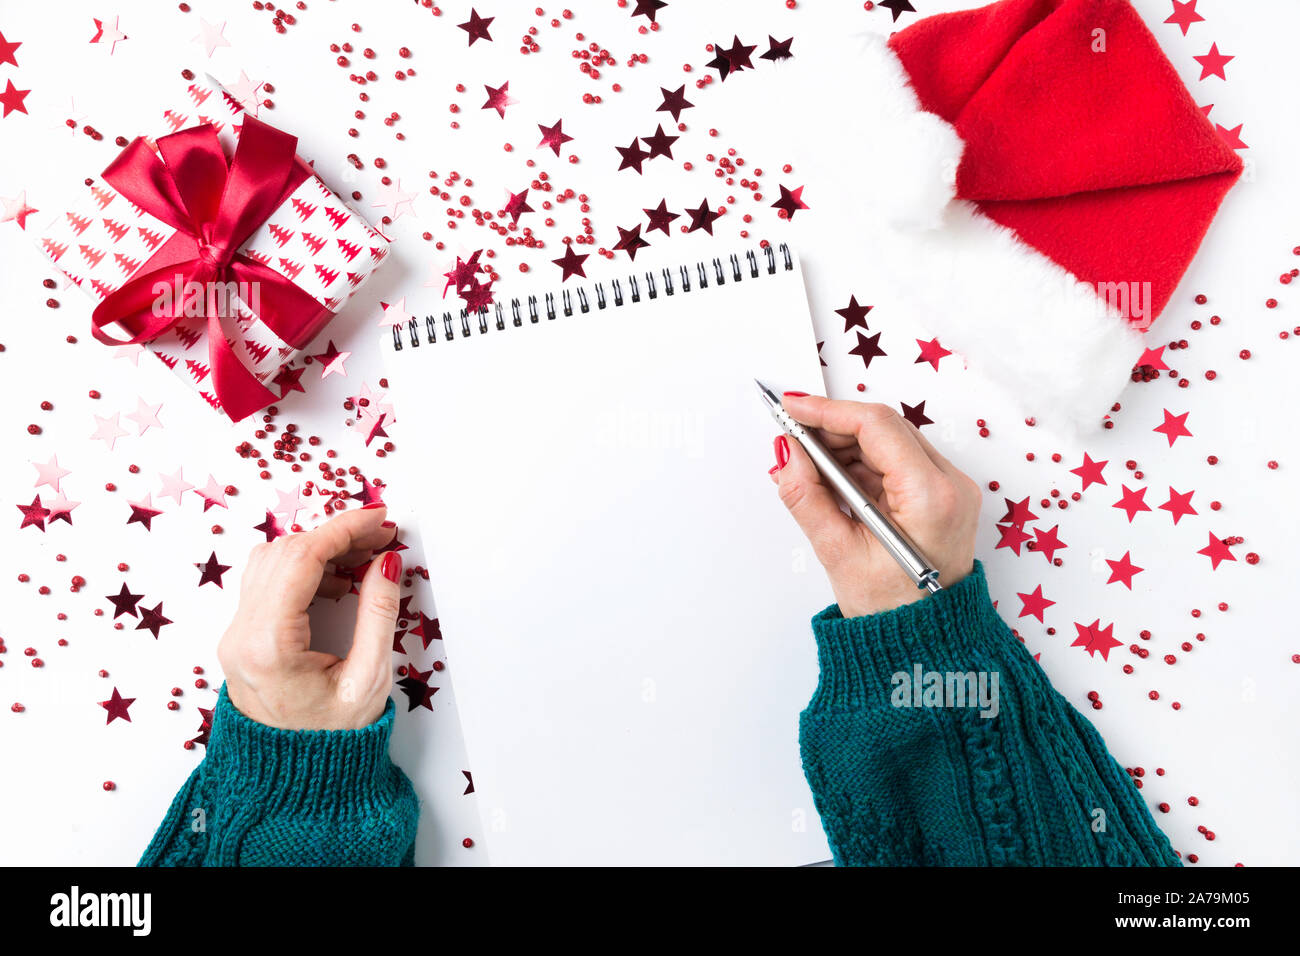 Woman in green sweater writes checklist of plans and dreams for next year. Wish list for Christmas and New Year. To Do List for New 2020 year with red Stock Photo